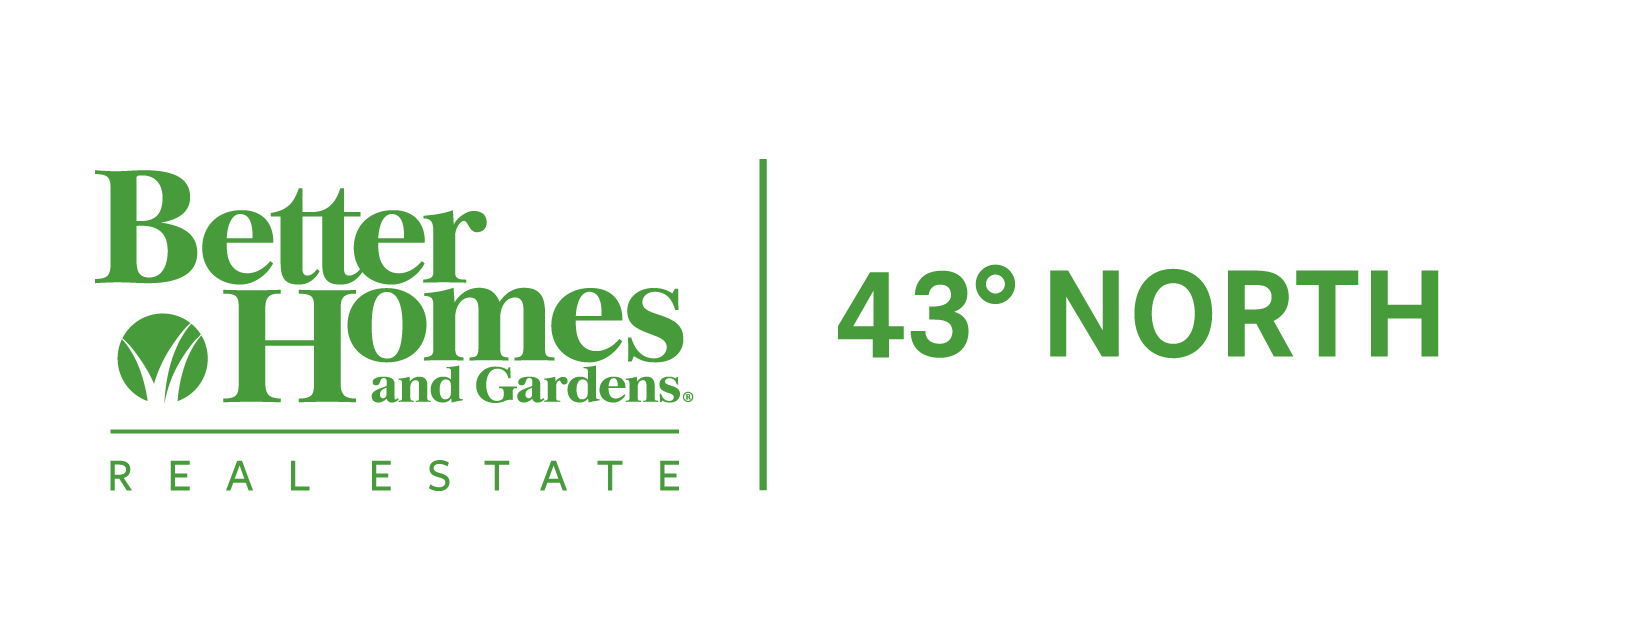 Better Homes and Gardens Real Estate 43° North